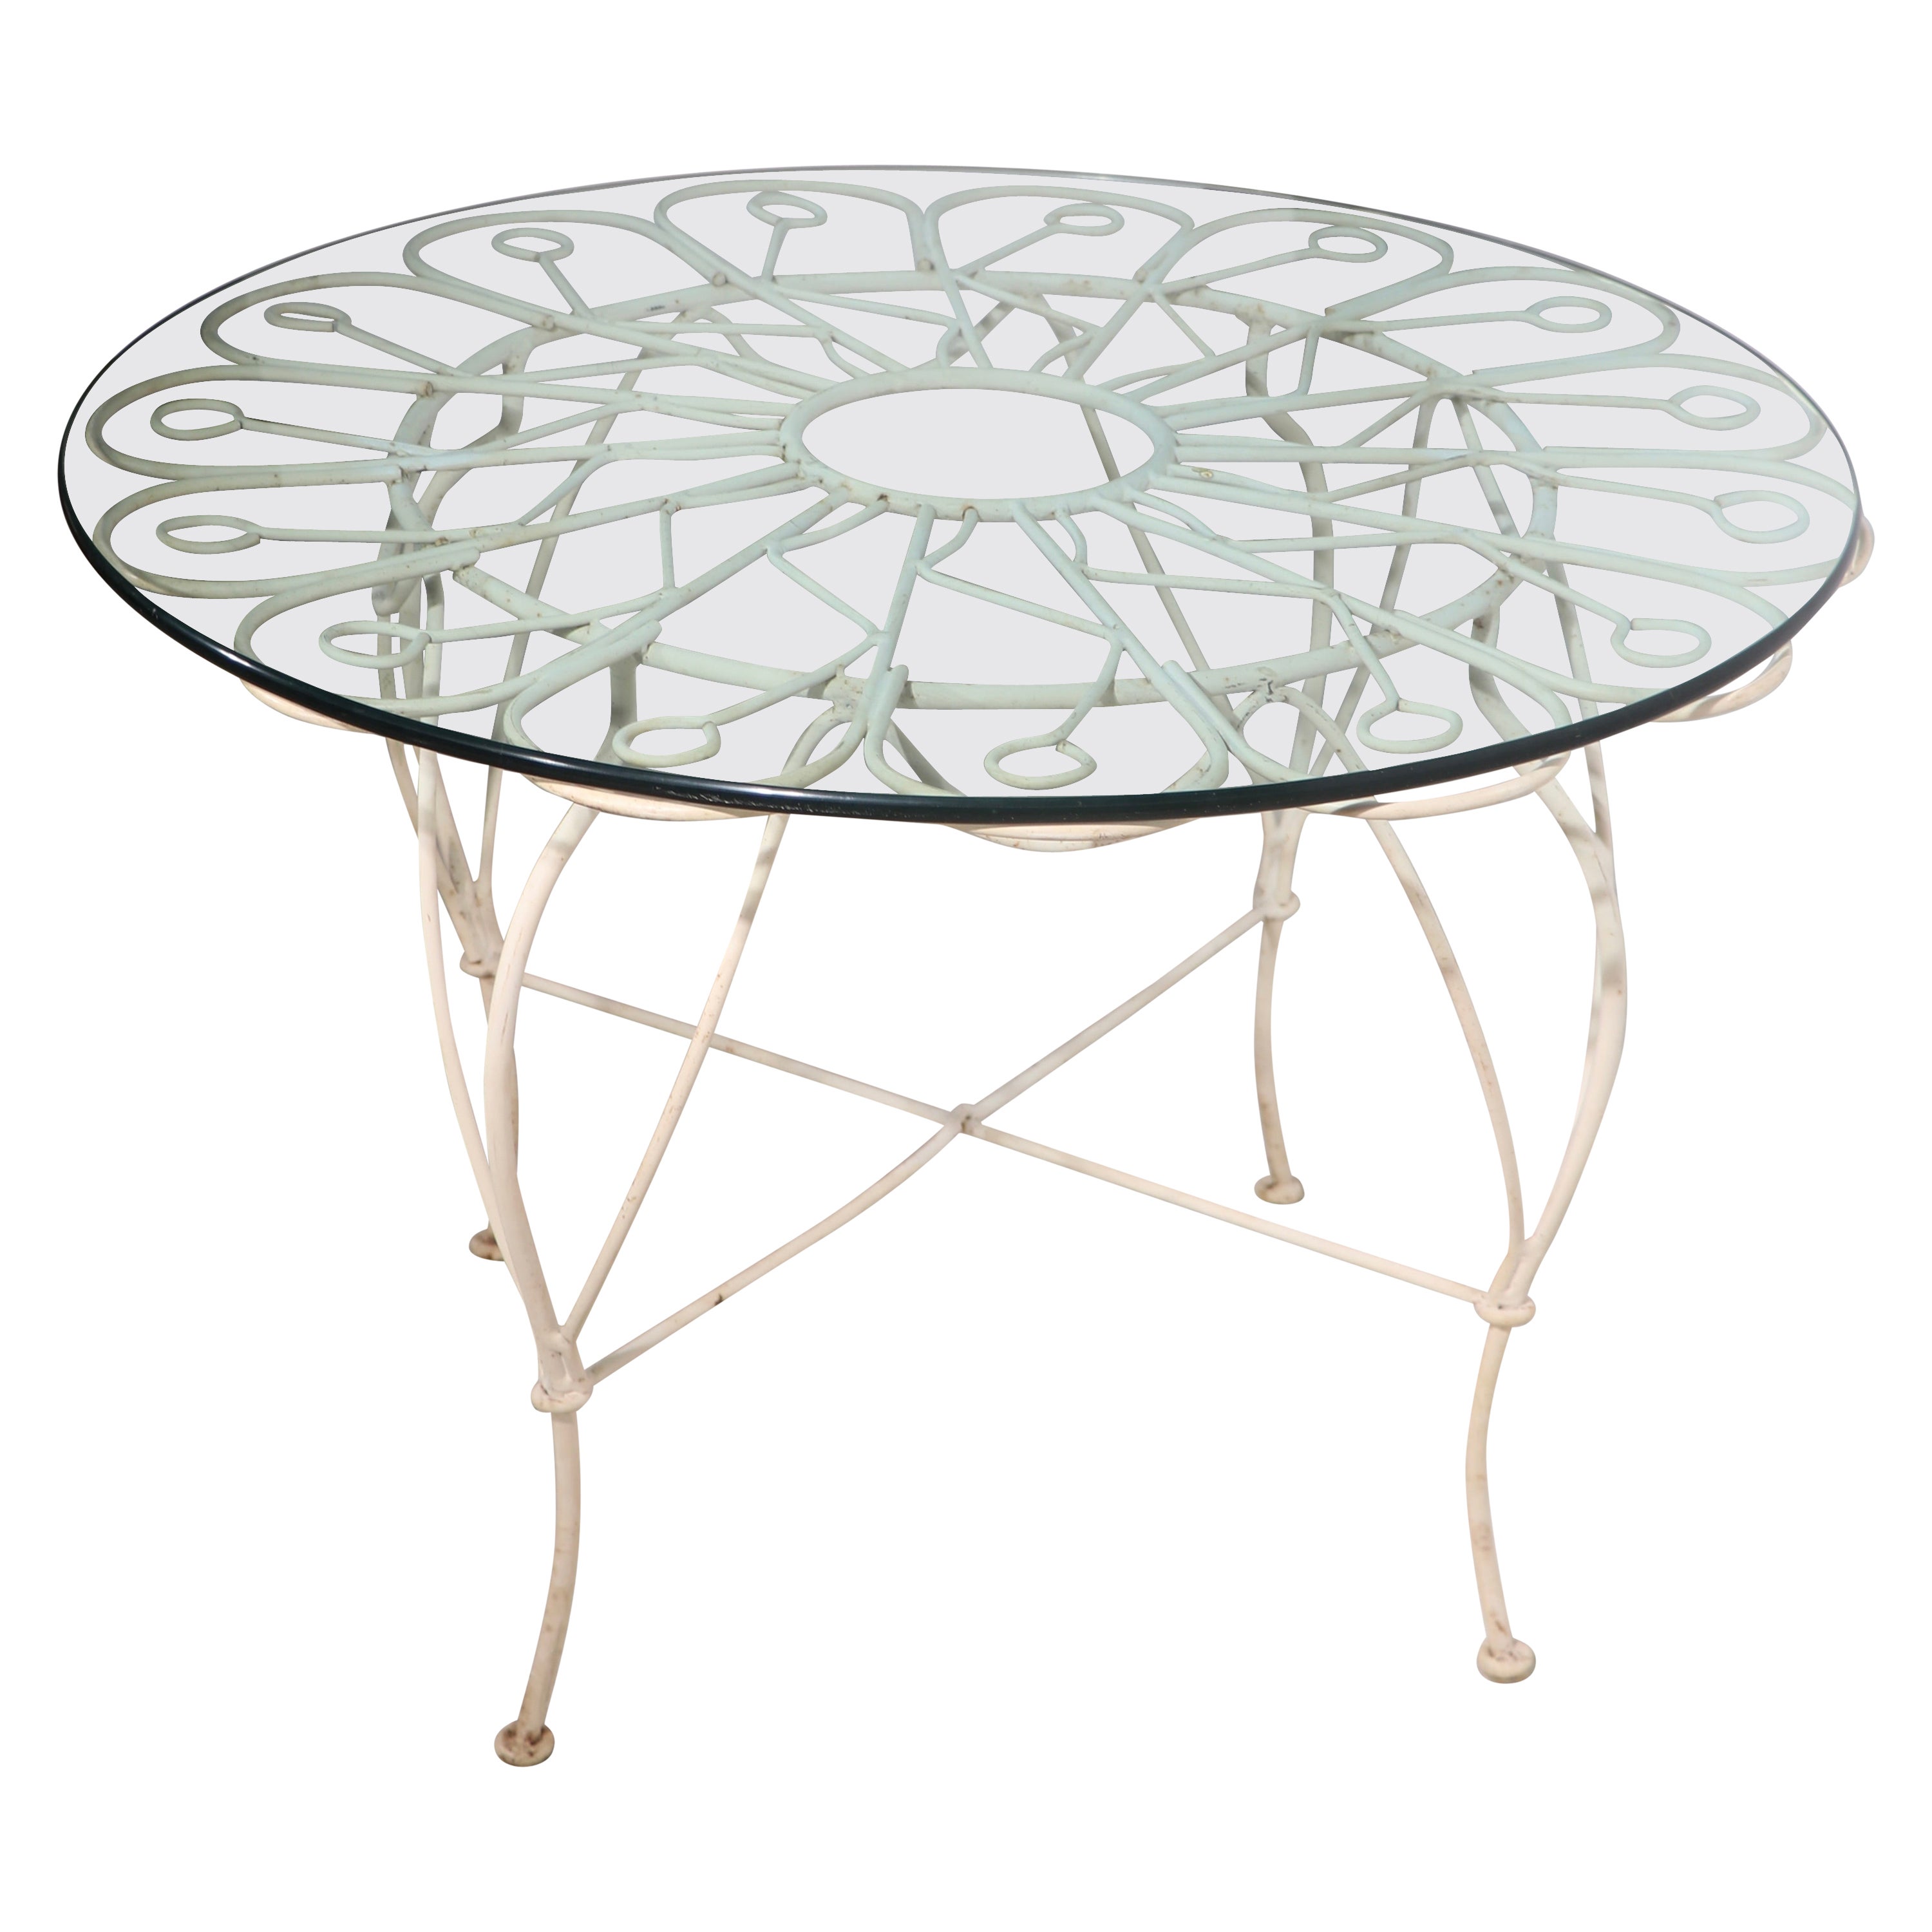 Wrought Iron and Glass Garden Patio Poolside Cafe Dining Center Table 